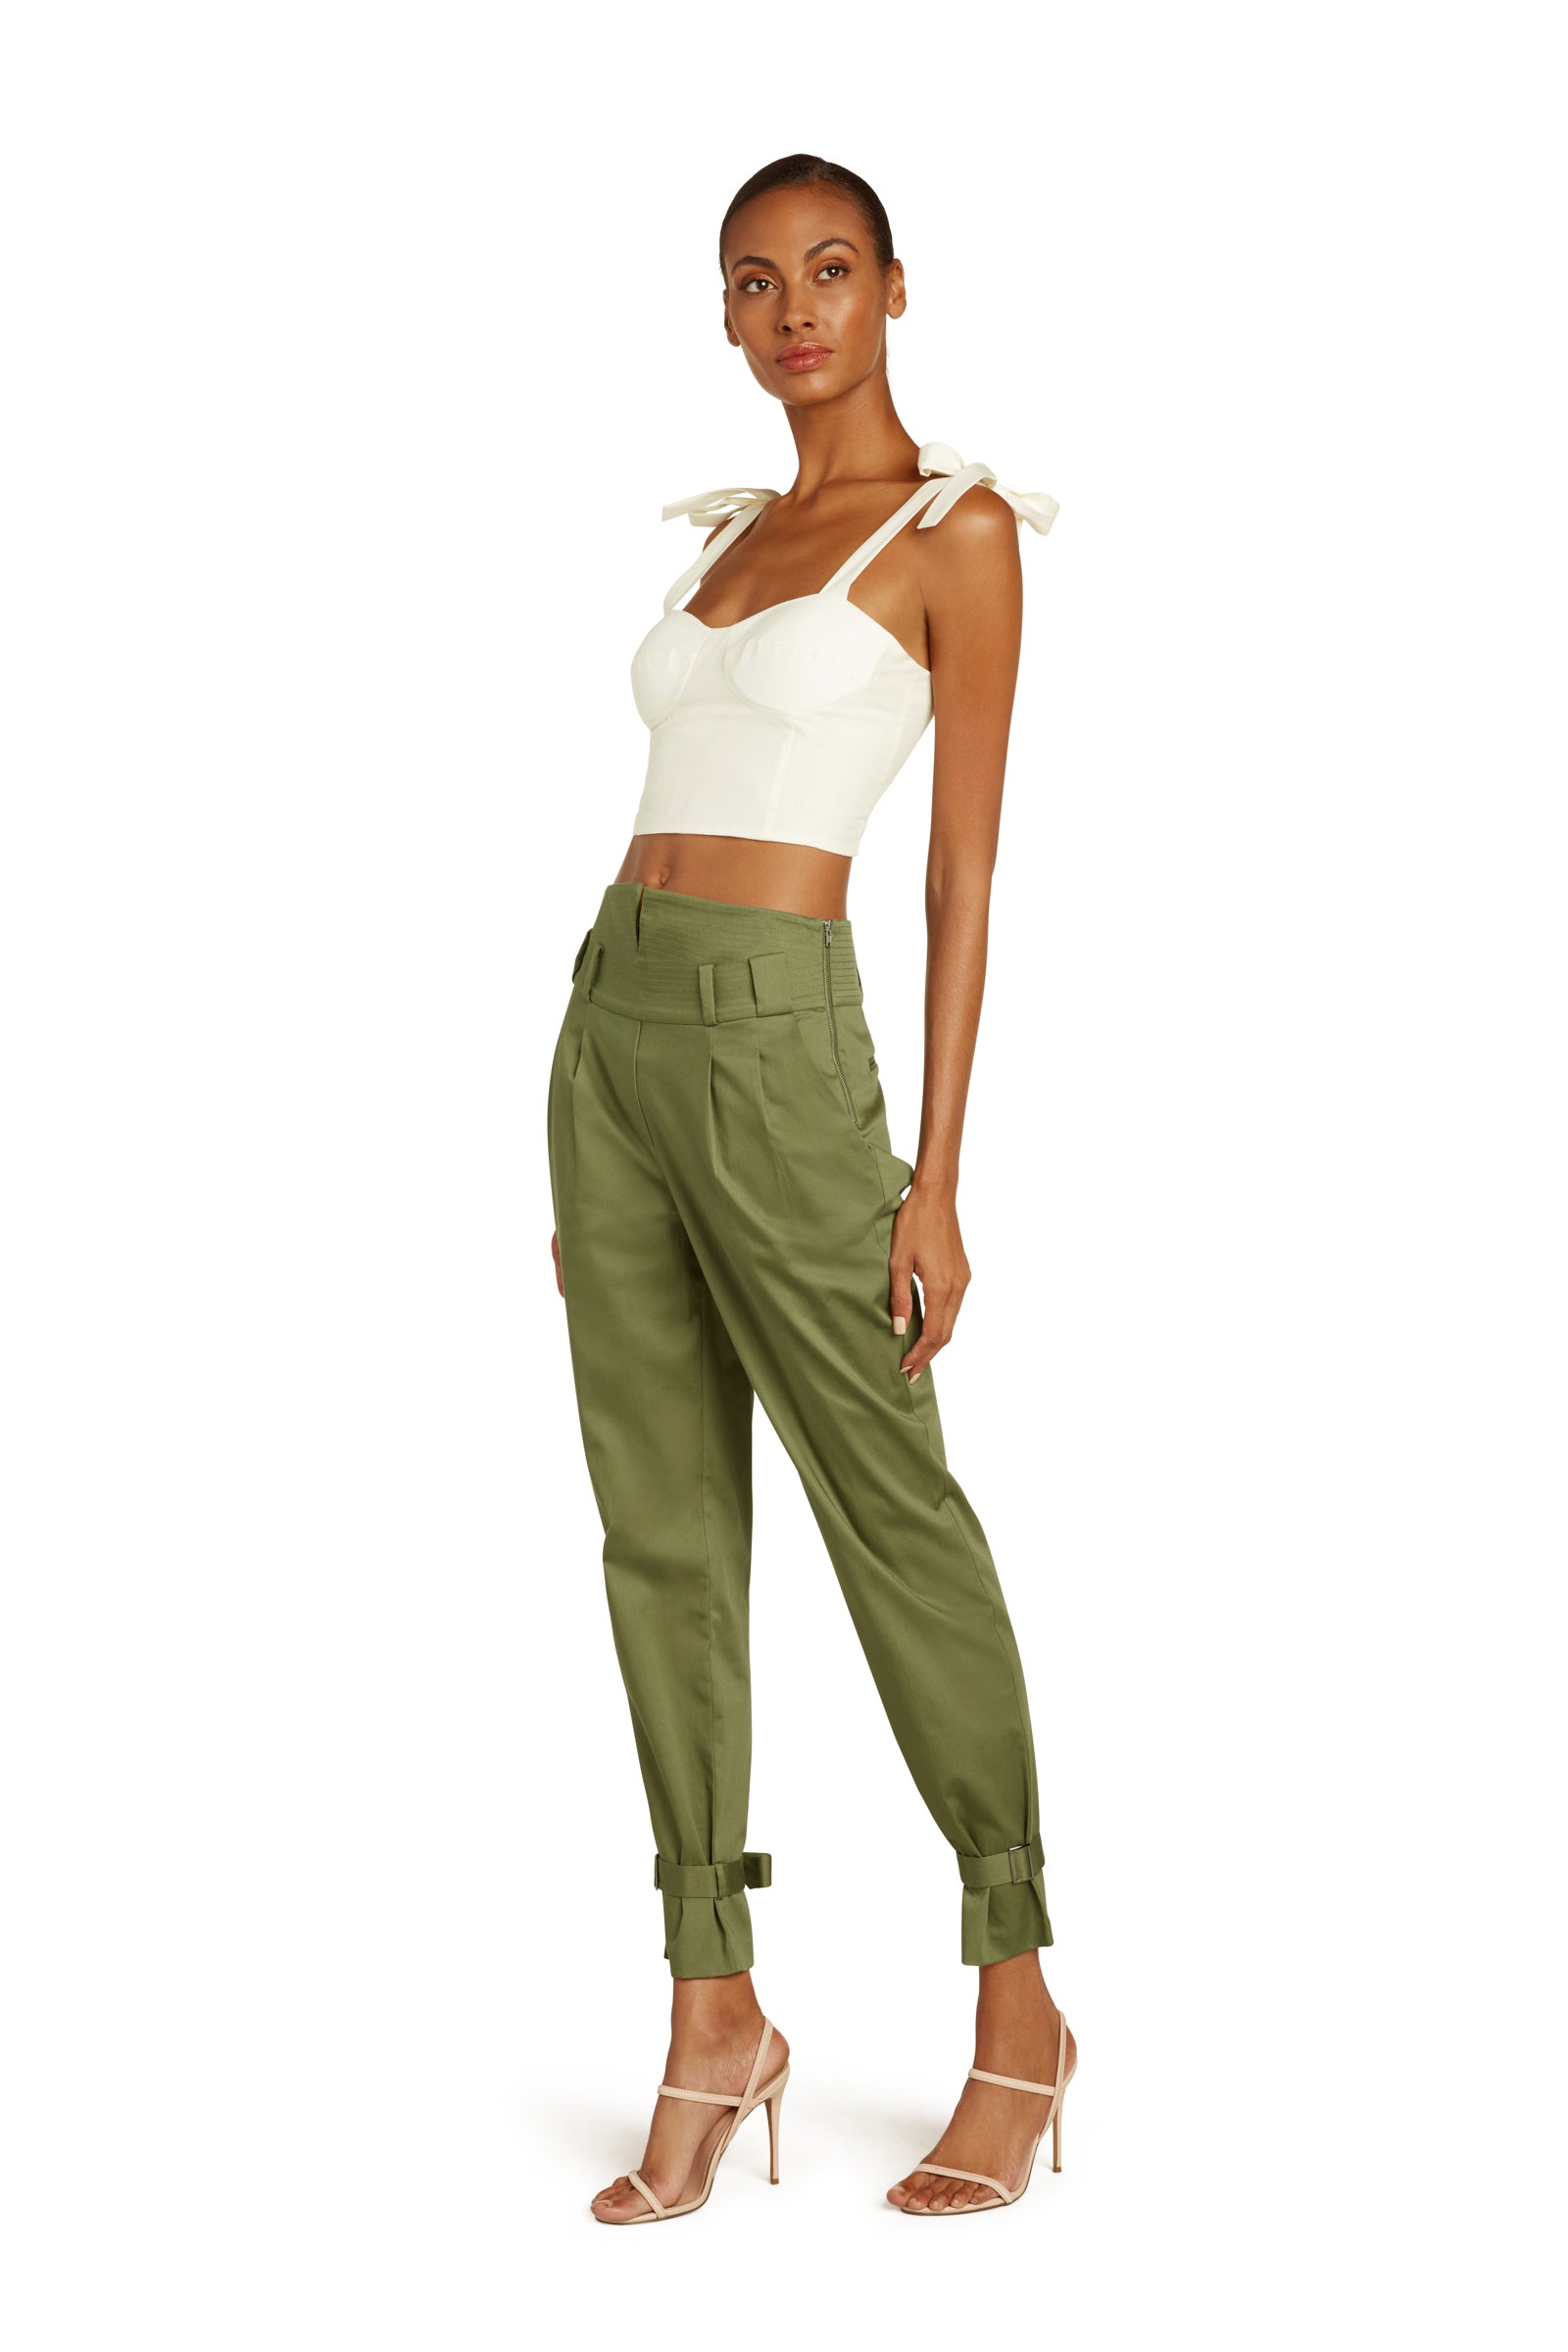 Top 167+ army pants women’s outfit best